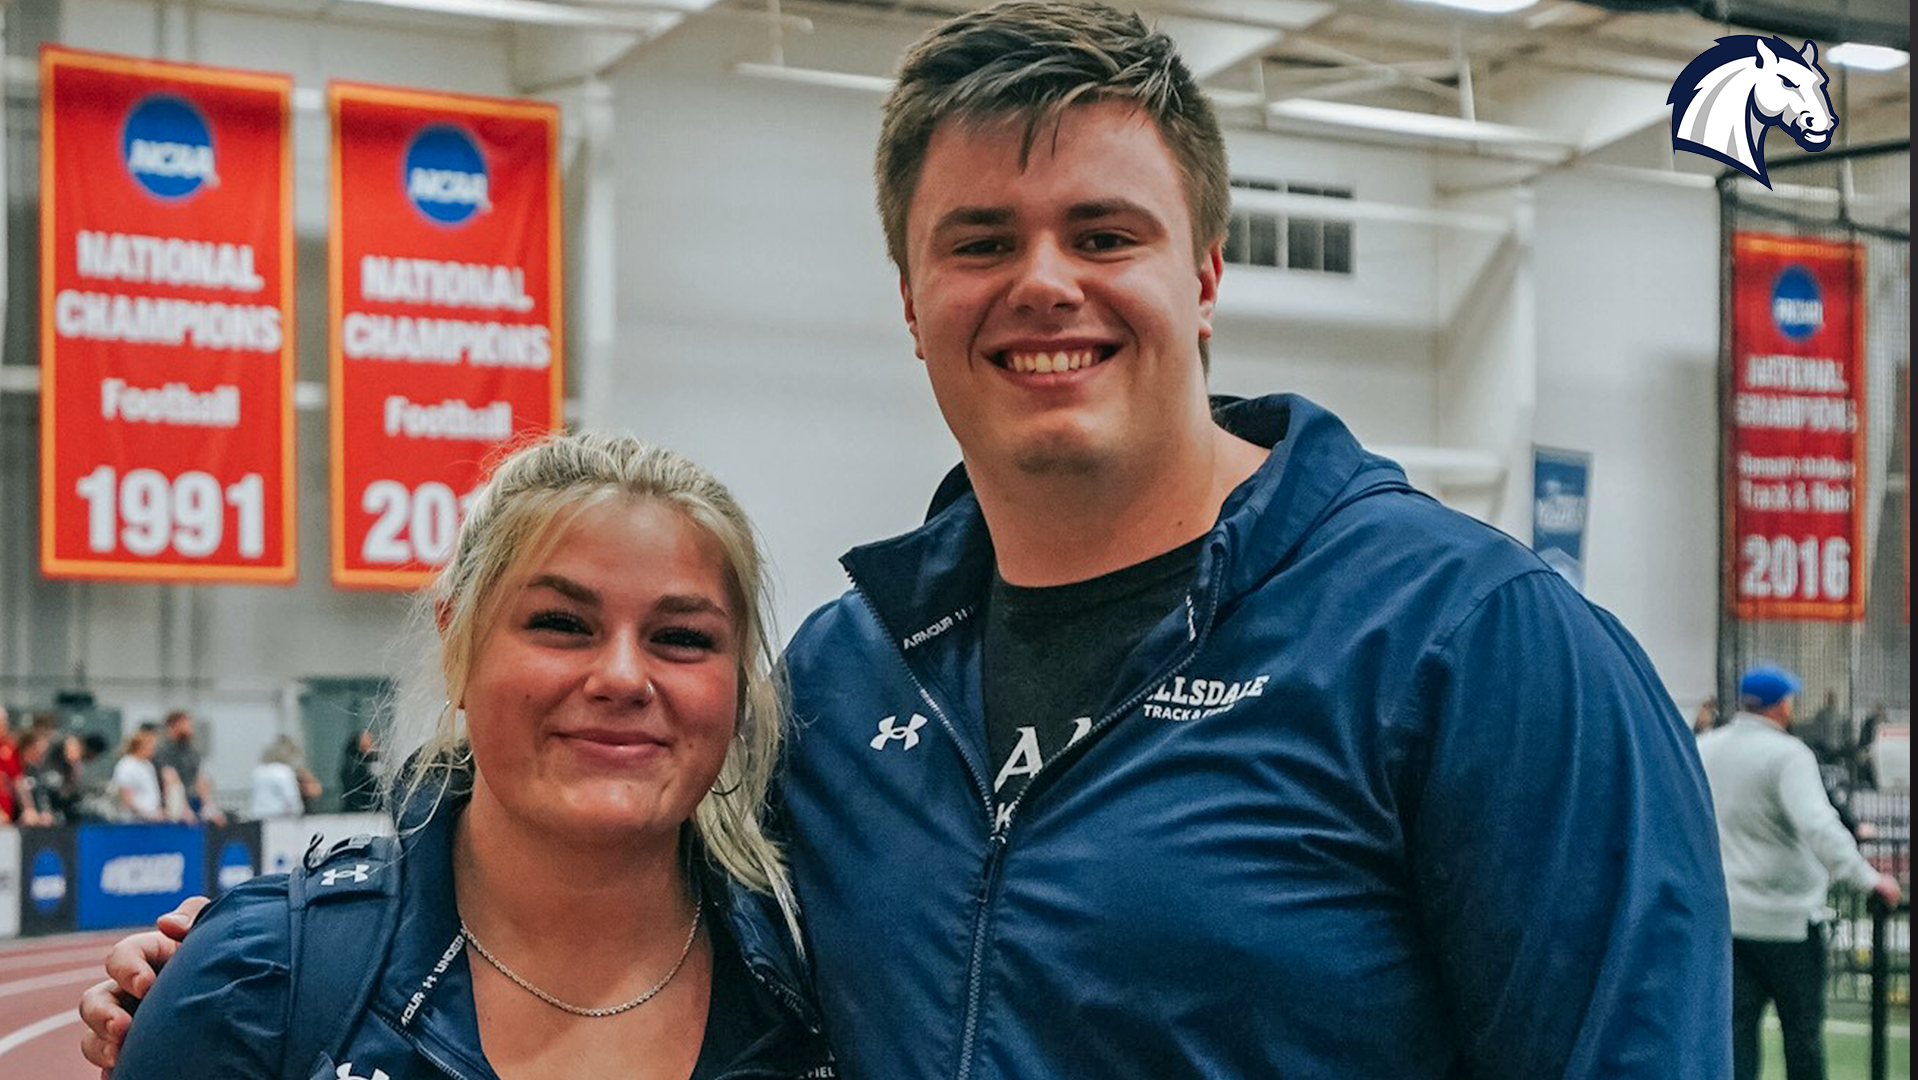 Haas repeats as All-American in the weight throw at NCAA DII Indoor Track and Field Championships